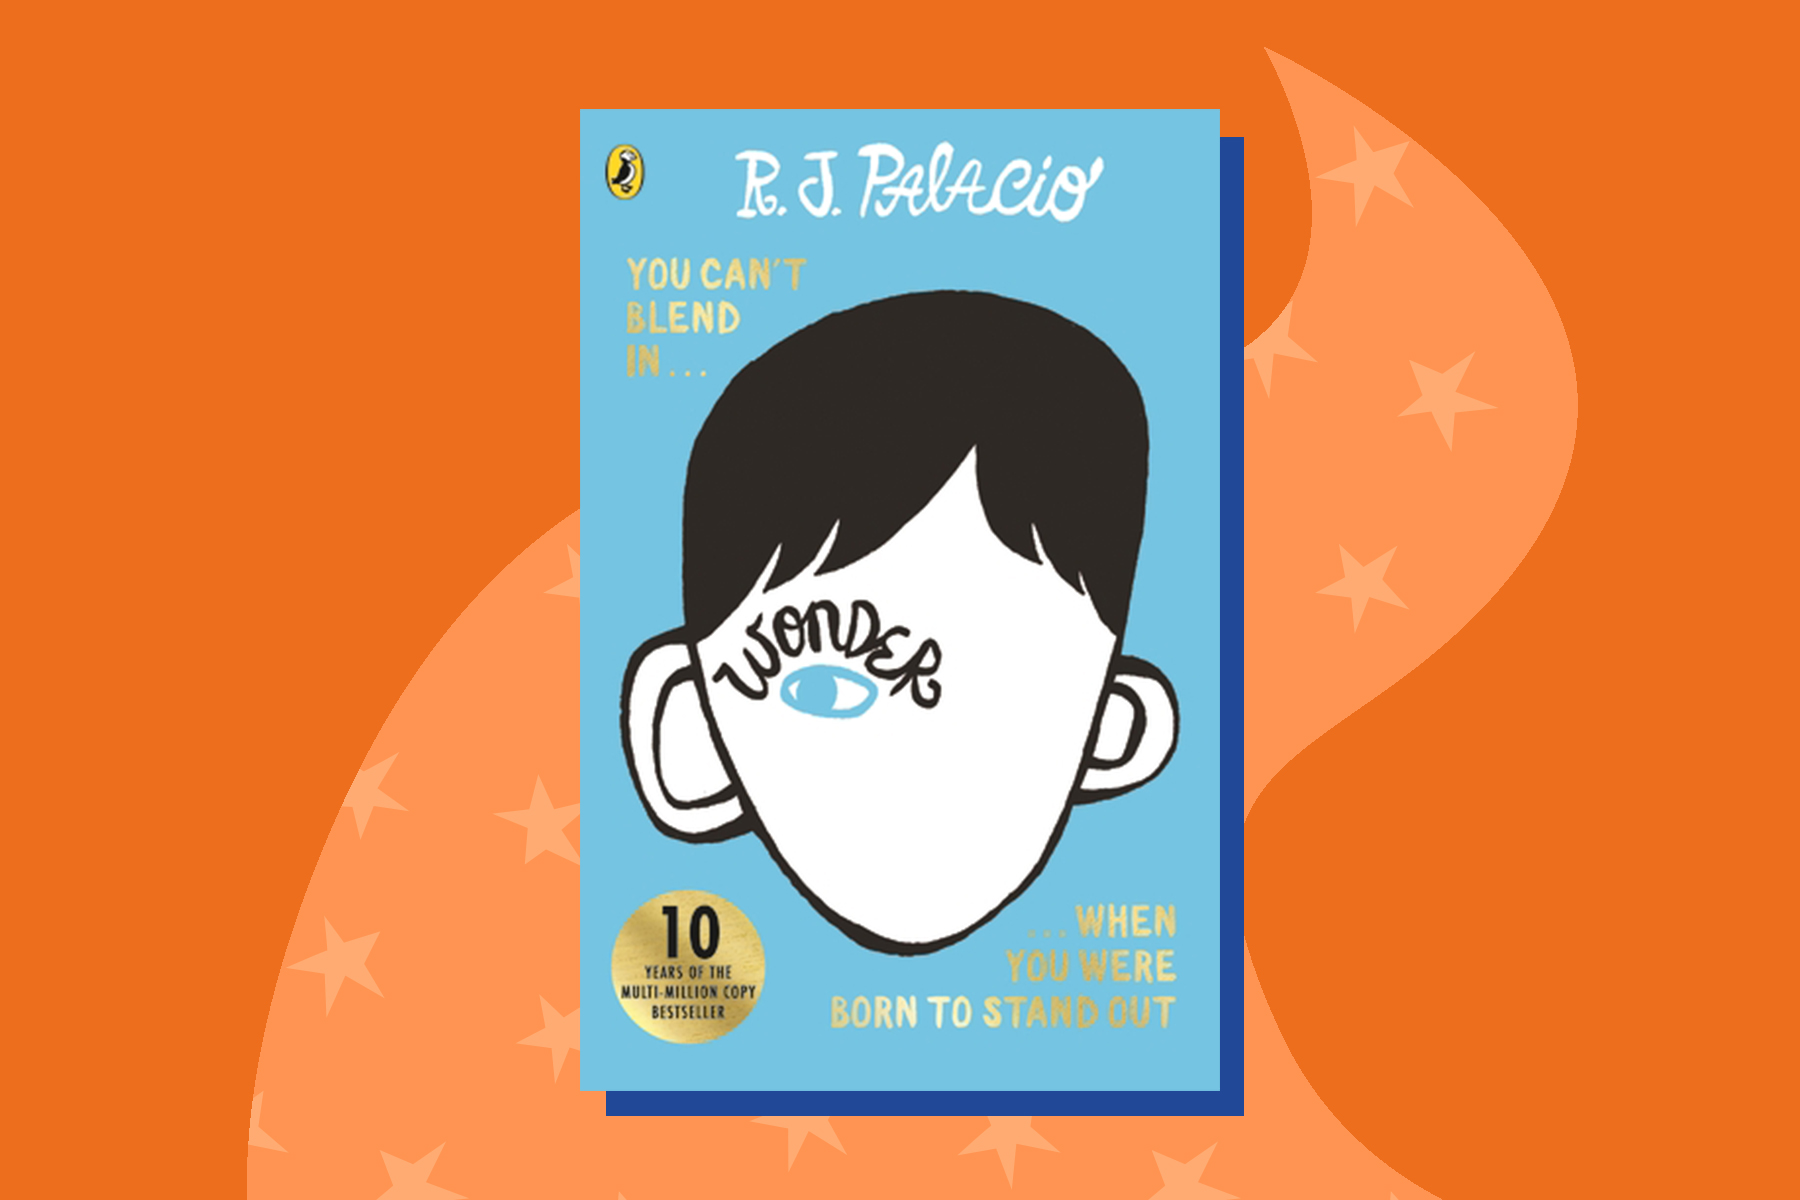 An image of the book Wonder by R J Palacio on an orange background with a shape coming out of the bottom filled with stars.